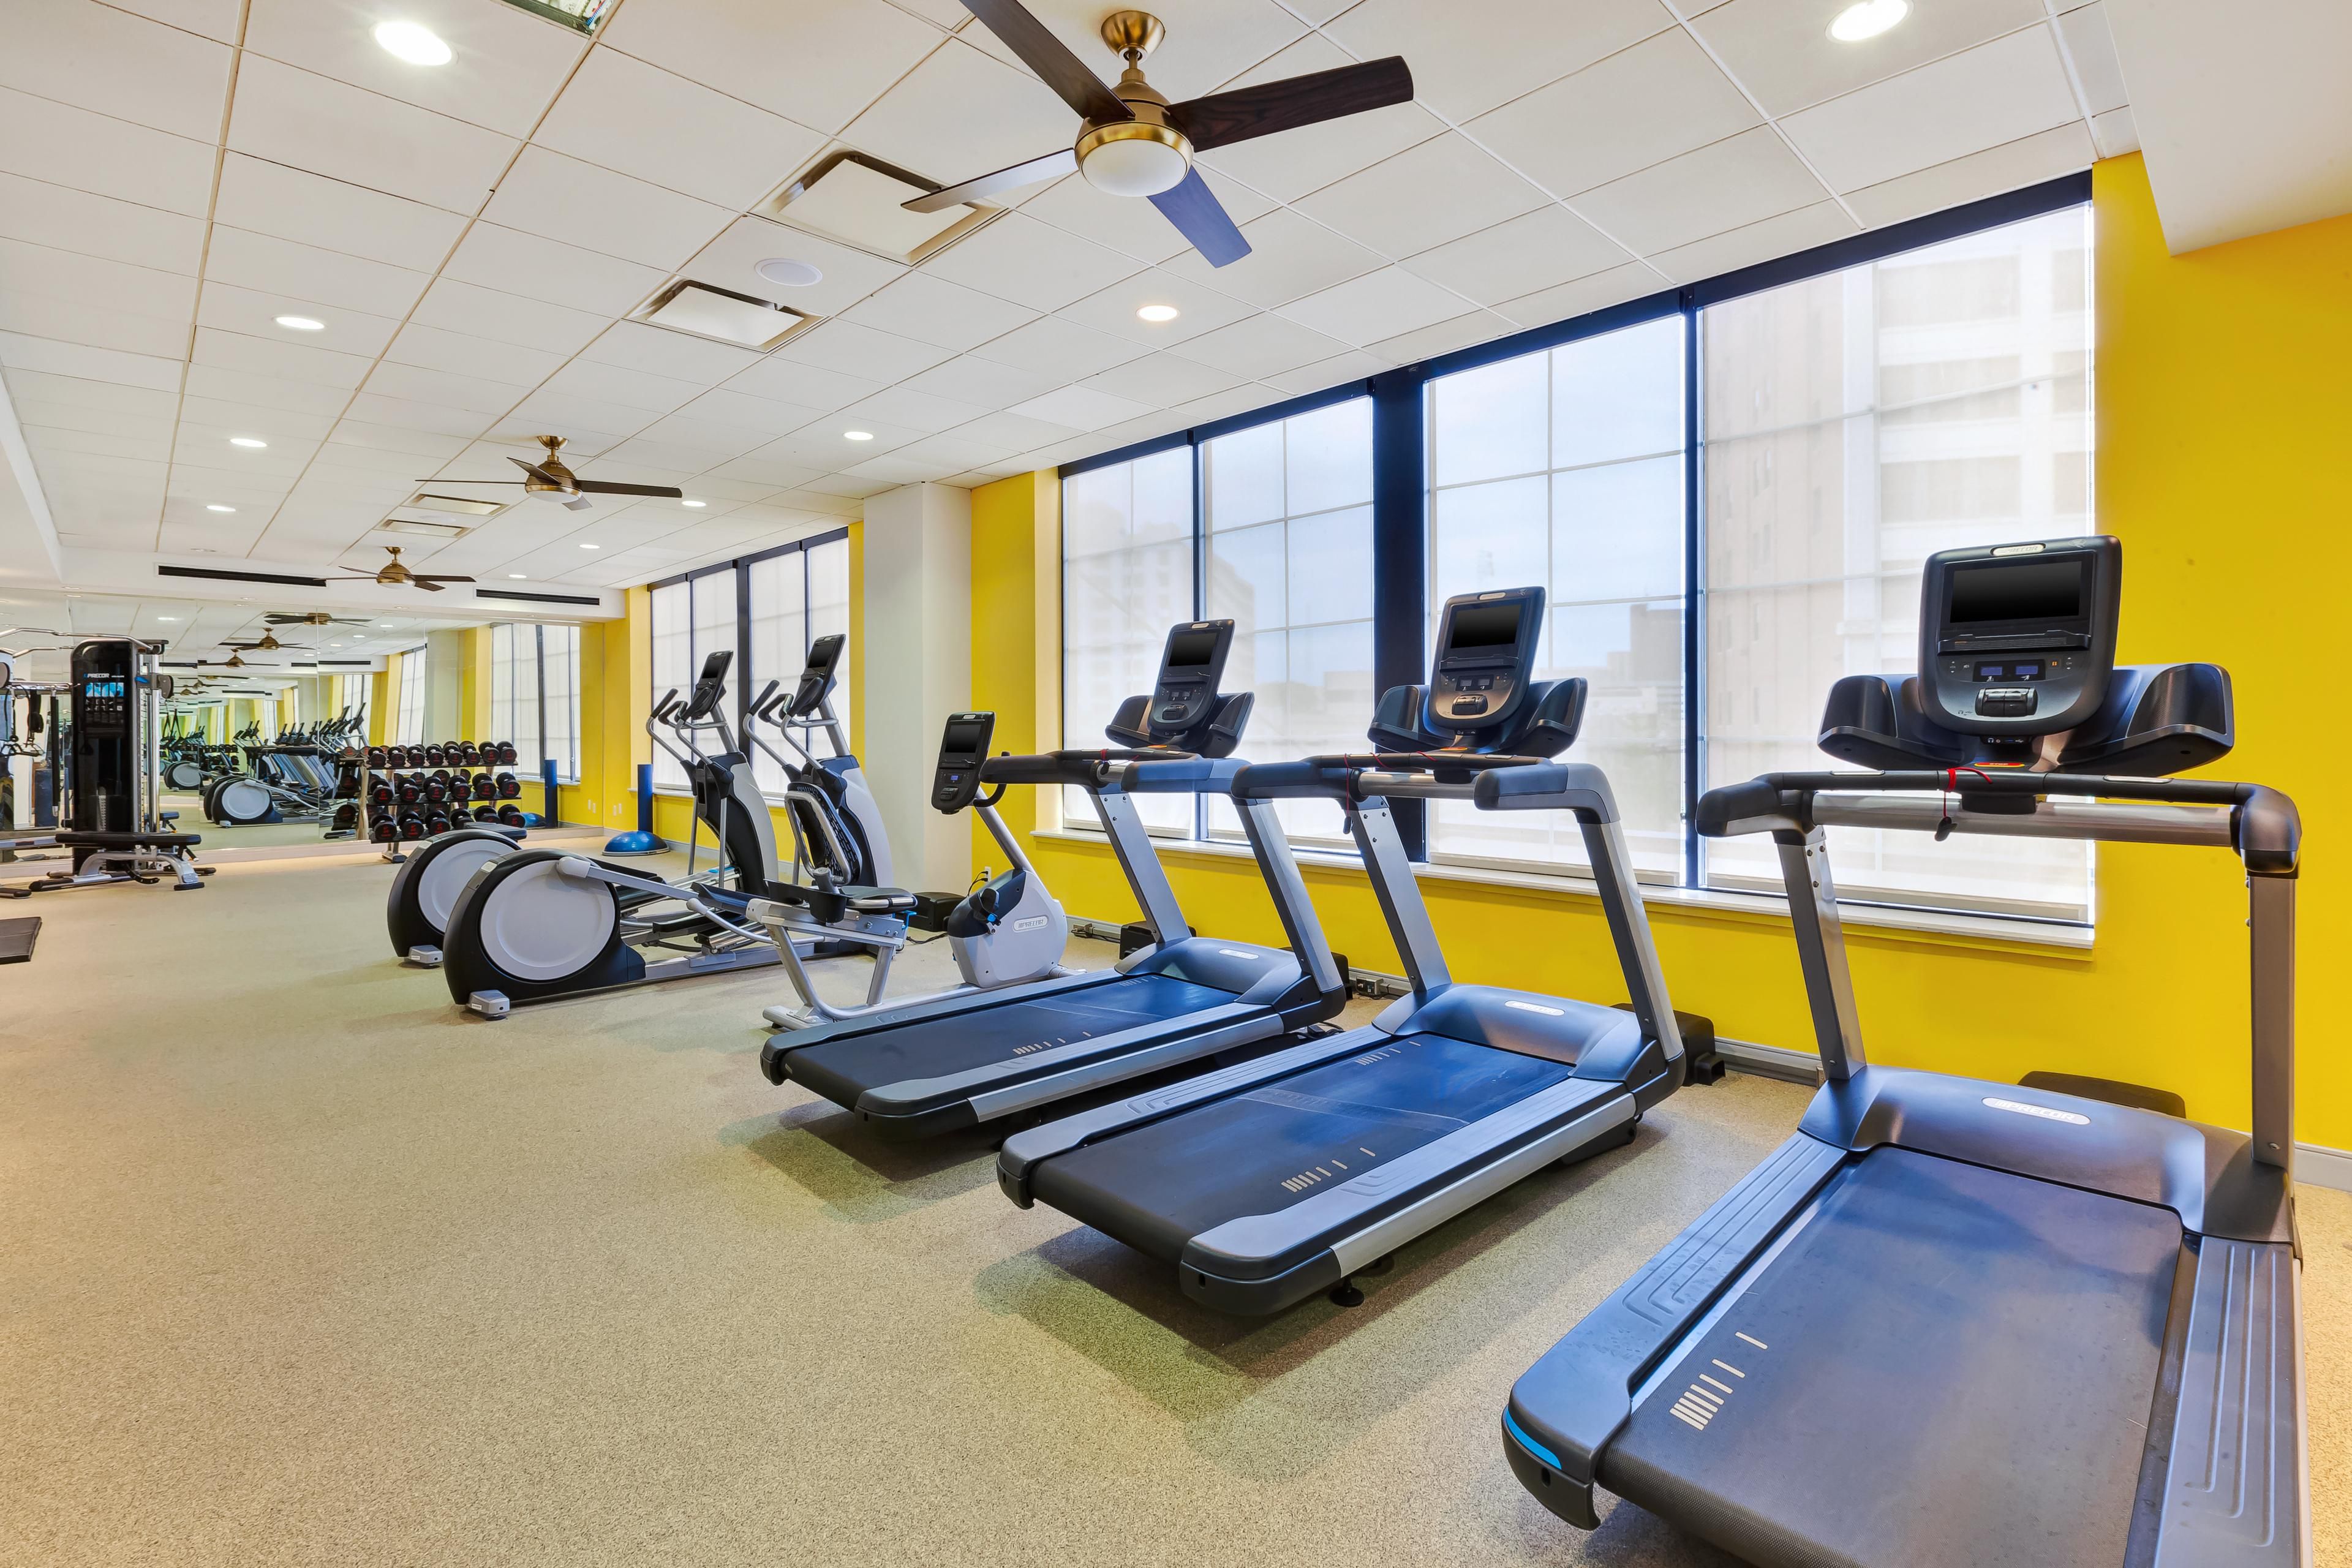 Stay active and energized around the clock at our 24-hour fitness center. Revel in panoramic views of downtown Detroit during your workout. Our state-of-the-art facility boasts weightlifting equipment and brand-new cardio machines, complete with built-in Wi-Fi, TV, and Bluetooth connectivity. Stay with us and stay fit.